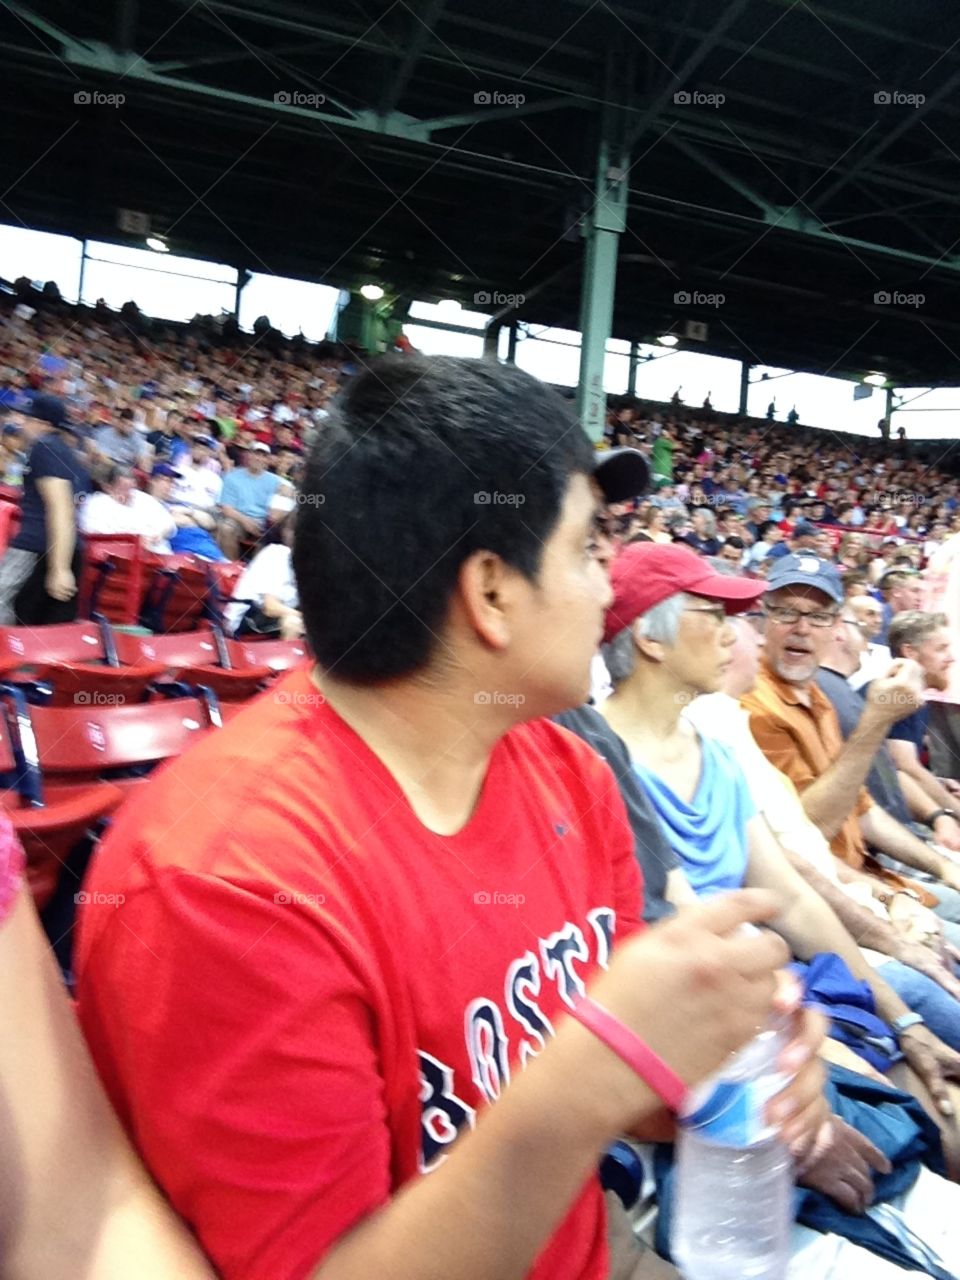 Man watching baseball game with a crowd in a large stadium